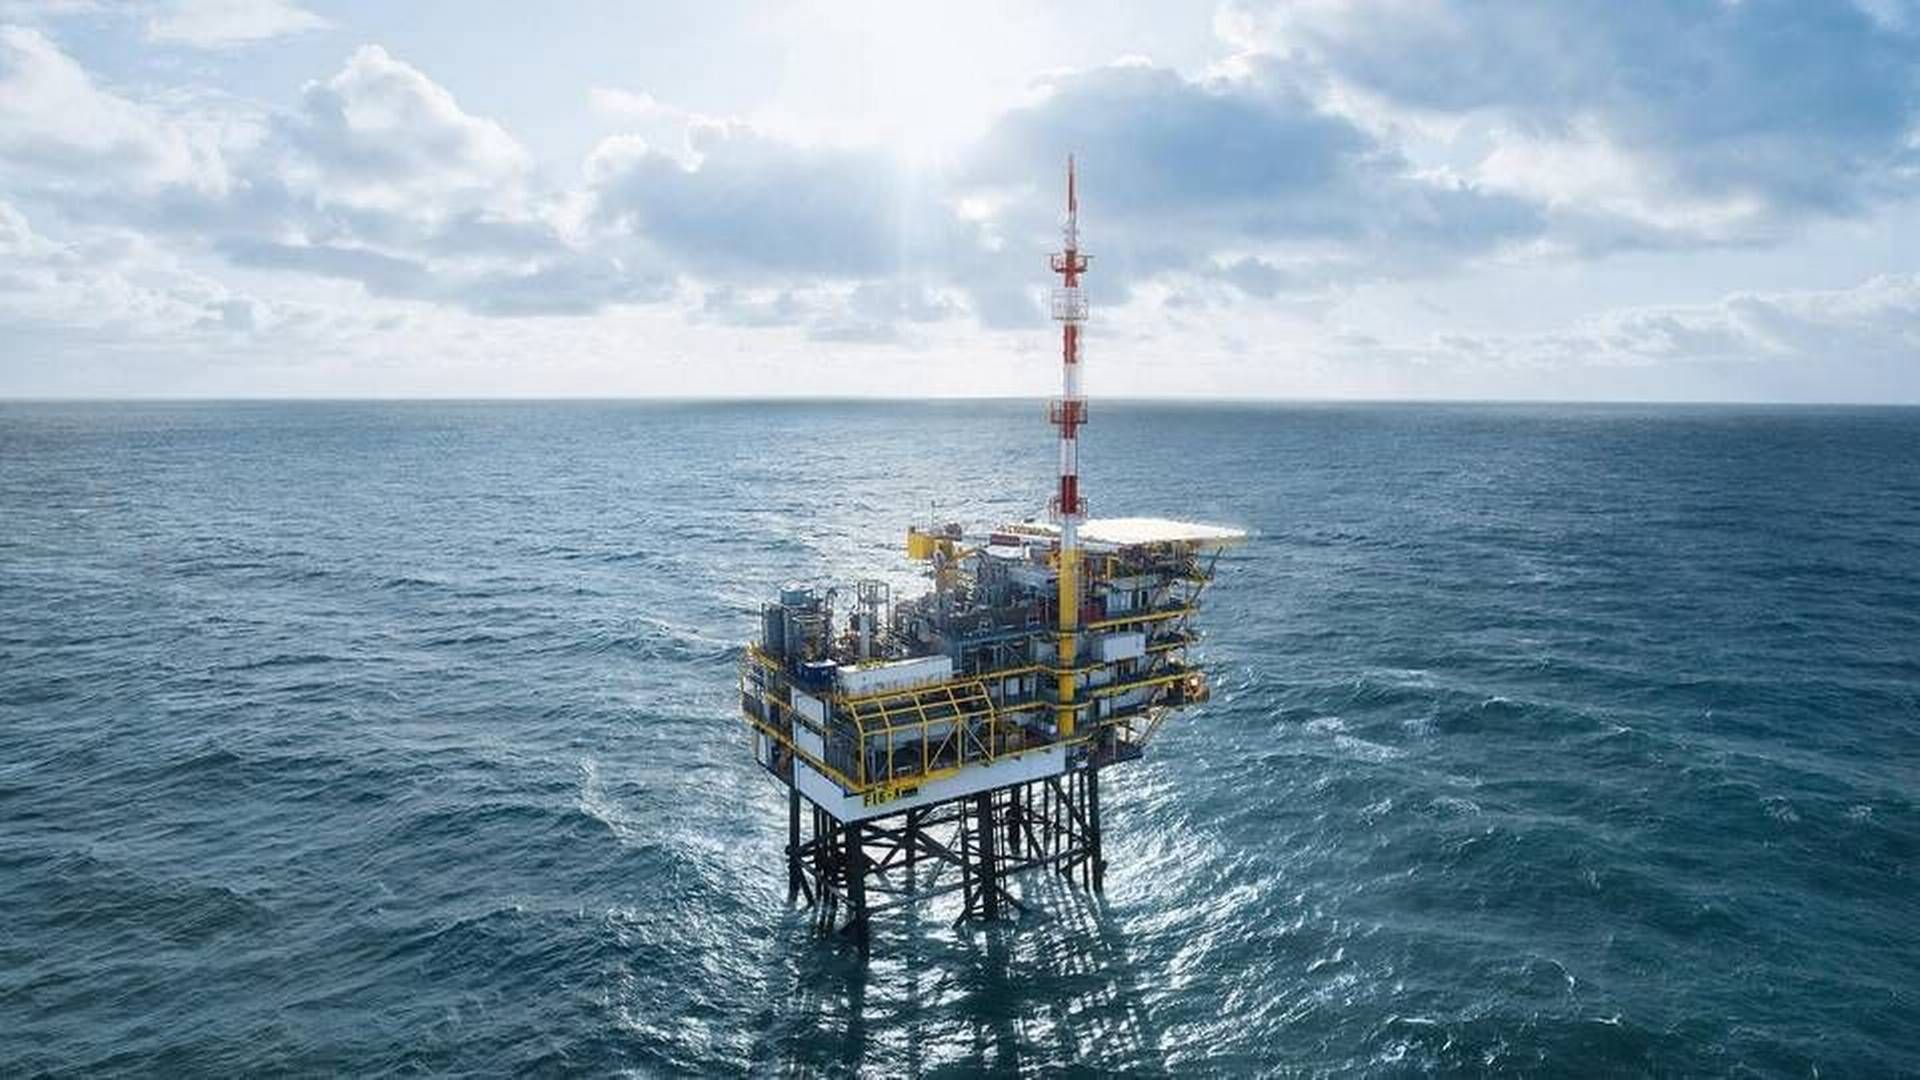 Wintershall's CCS business in Europe is also part of the deal. | Photo: Wintershall Dea